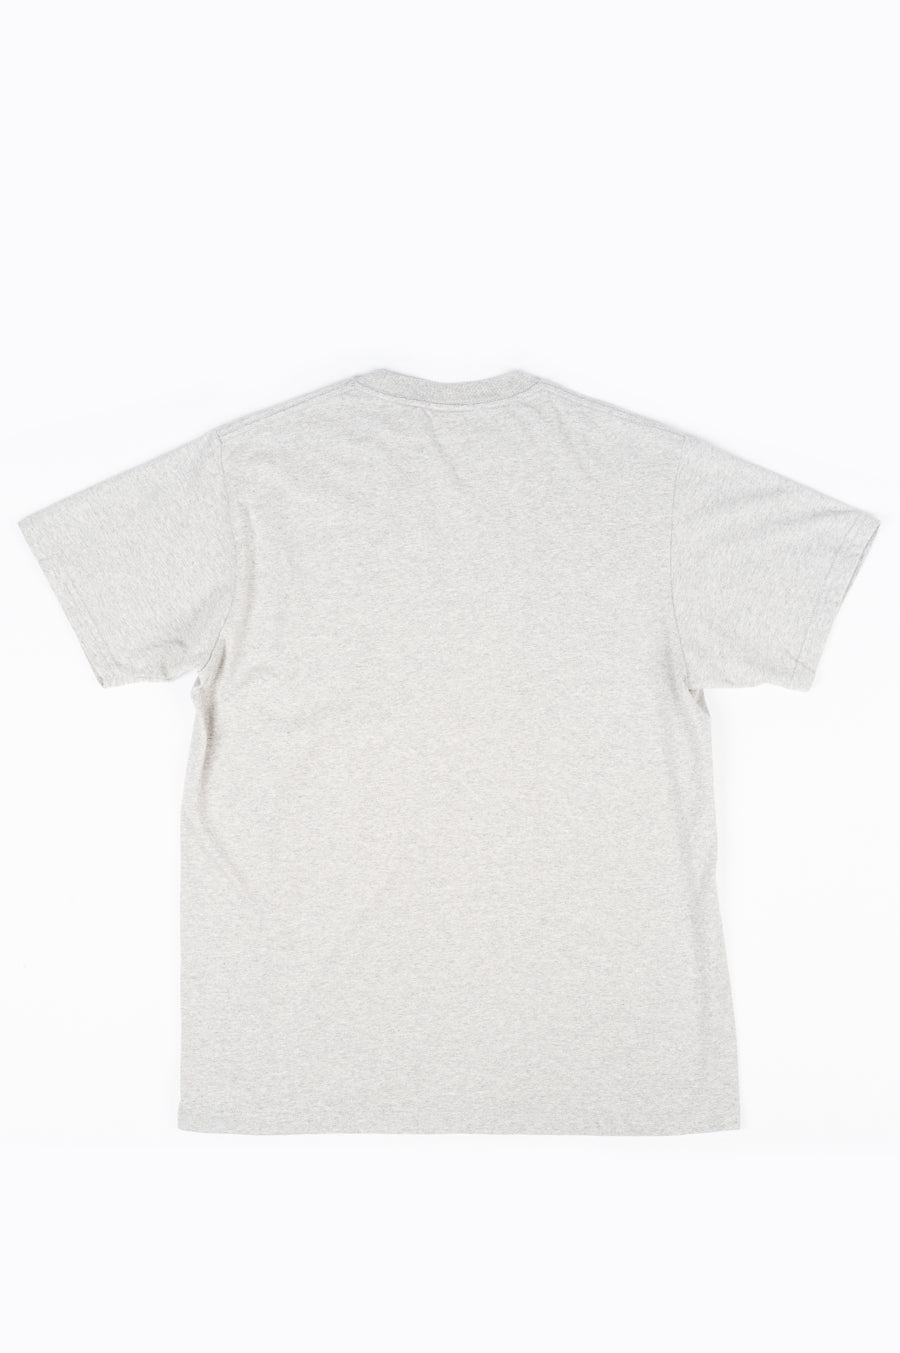 SPORTY AND RICH PRINCETON T-SHIRT HEATHER GREY